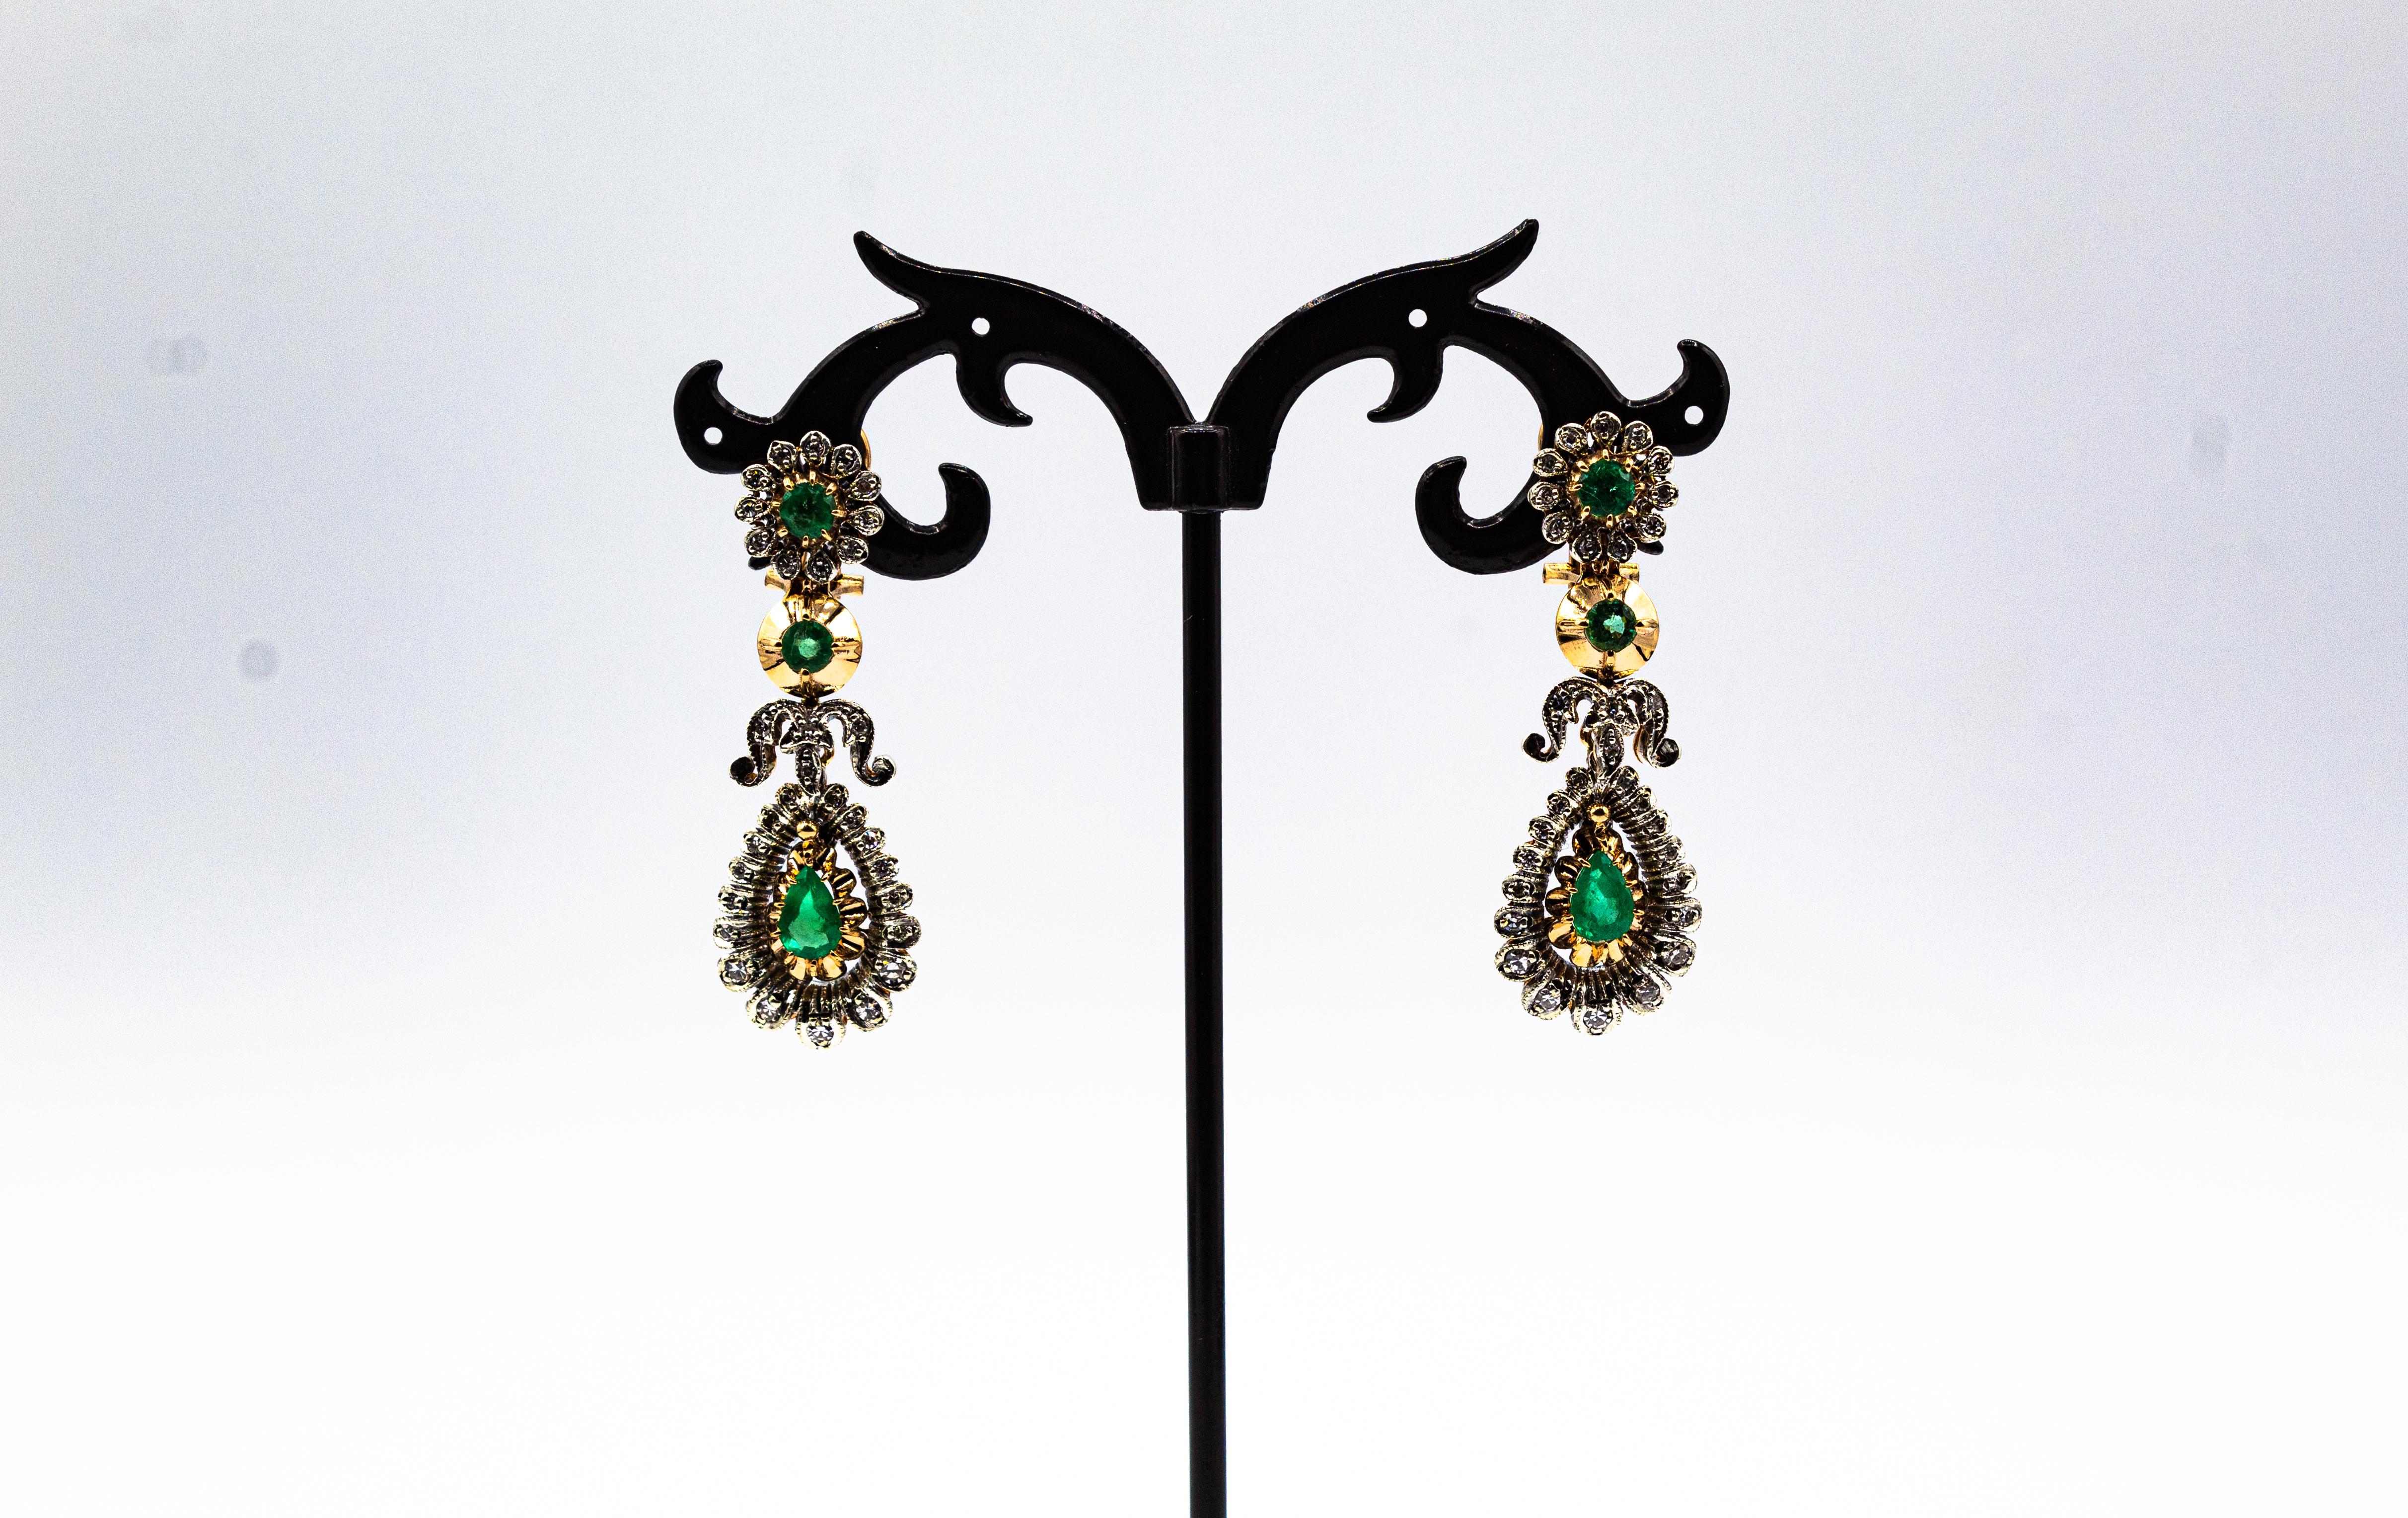 These Clip-On Earrings are made of 9K Yellow Gold and Sterling Silver.
These Earrings have 0.70 Carats of White Modern Round Cut Diamonds.
These Earrings have also 1.80 Carat of Modern Round Cut and Pear Cut Emeralds.

These Earrings are available